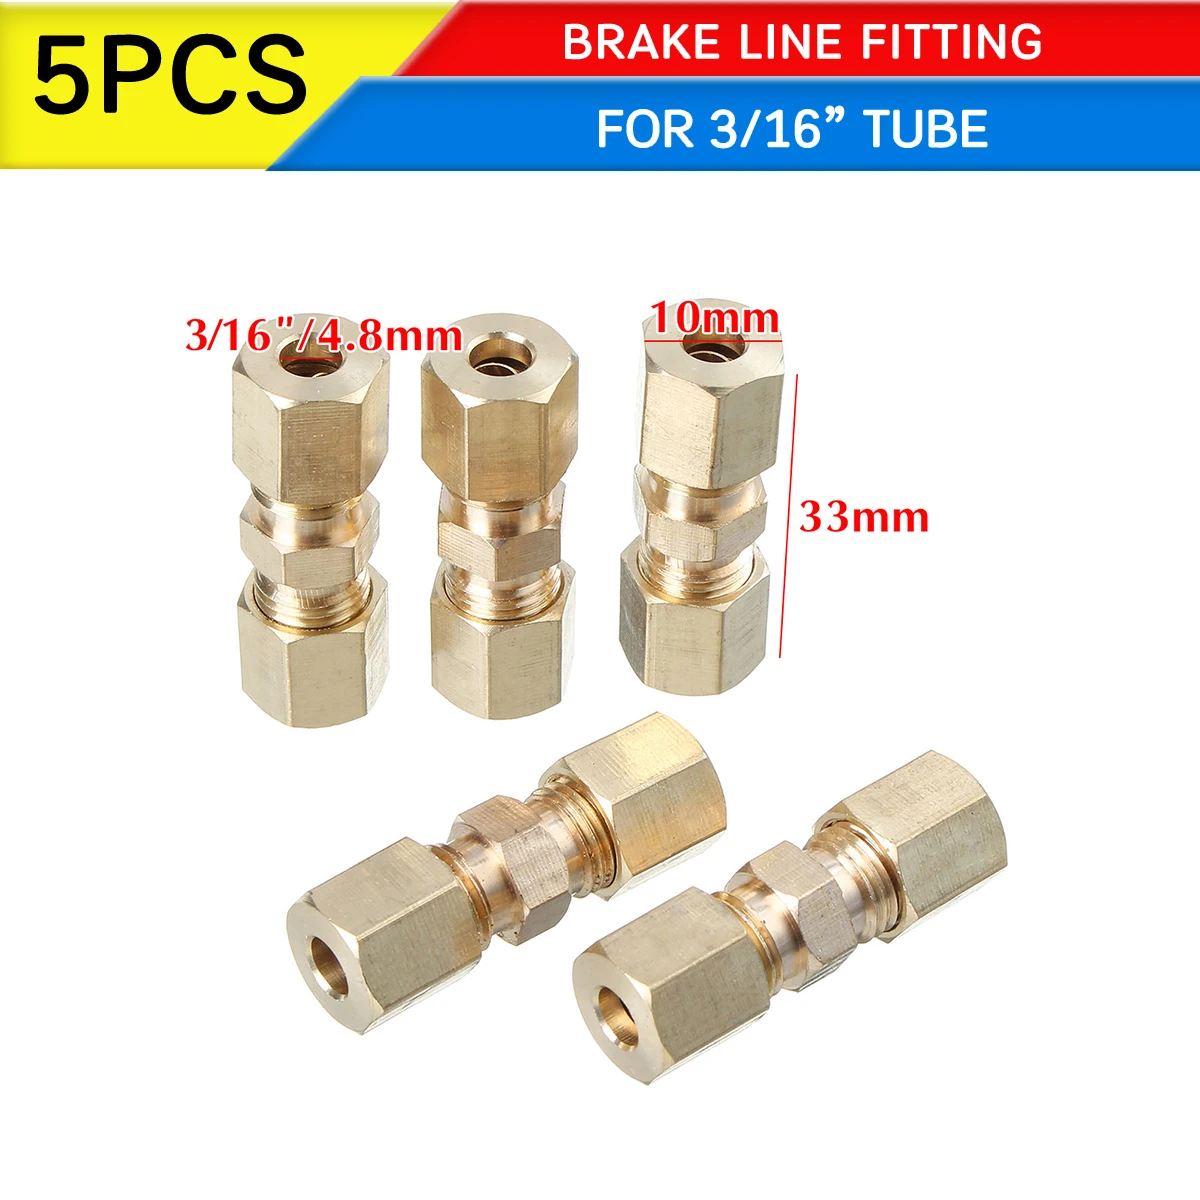 

Hydraulic Brake Lines Union 5PCS 33 x 10mm Brass Straight Reducer Compression Fitting Connector 3/16" OD Tube